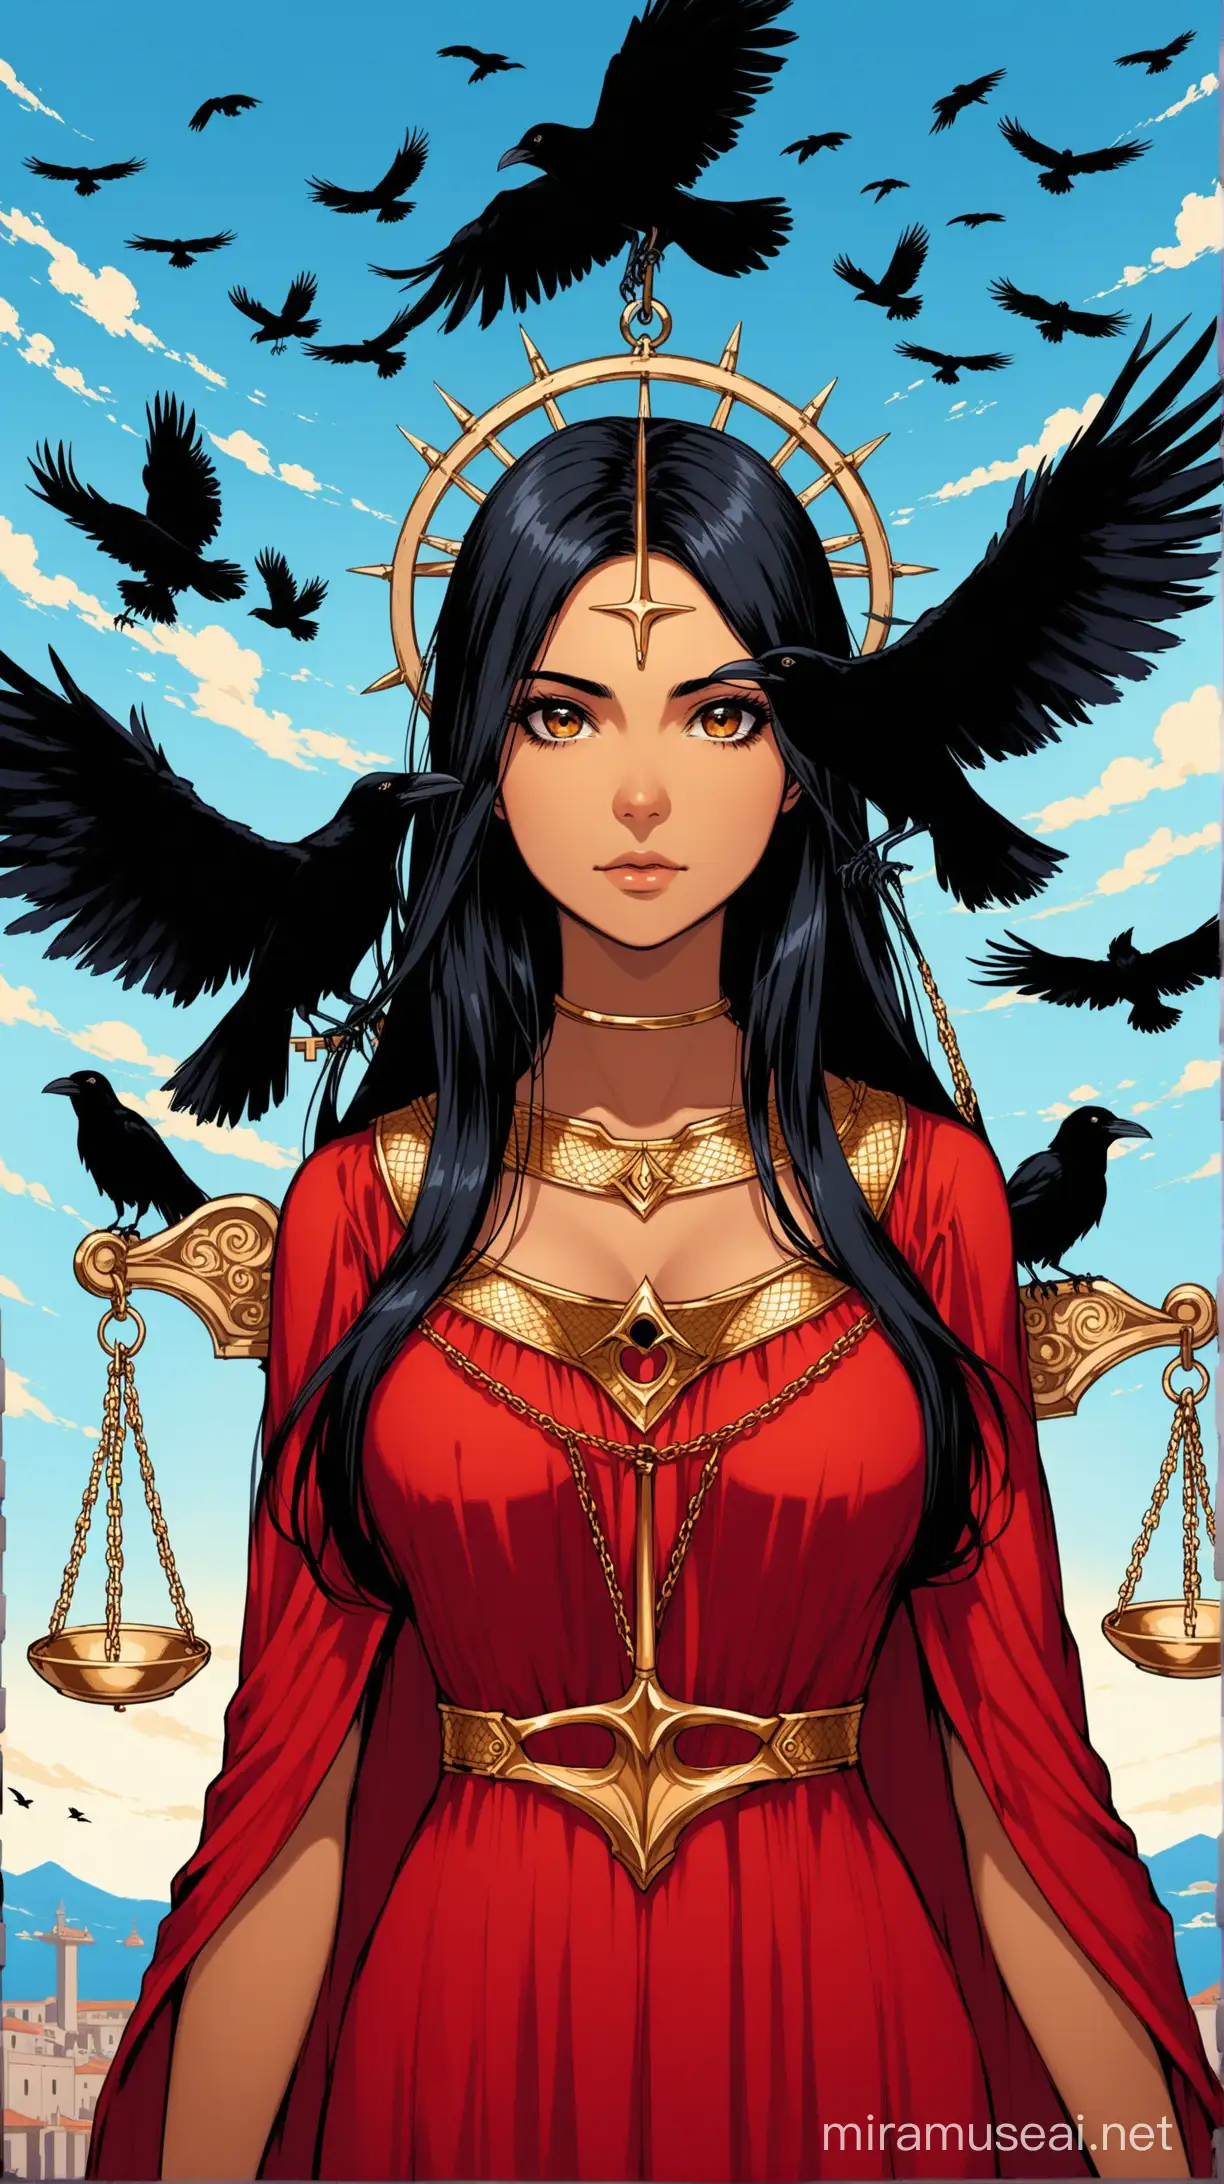 
Gold scales of justice on one side the face of a beautiful young Latin woman with olive skin and long black hair. The background behind her is light blue sky. On the otherside her face again but a dark red background with crows representing good and evil.